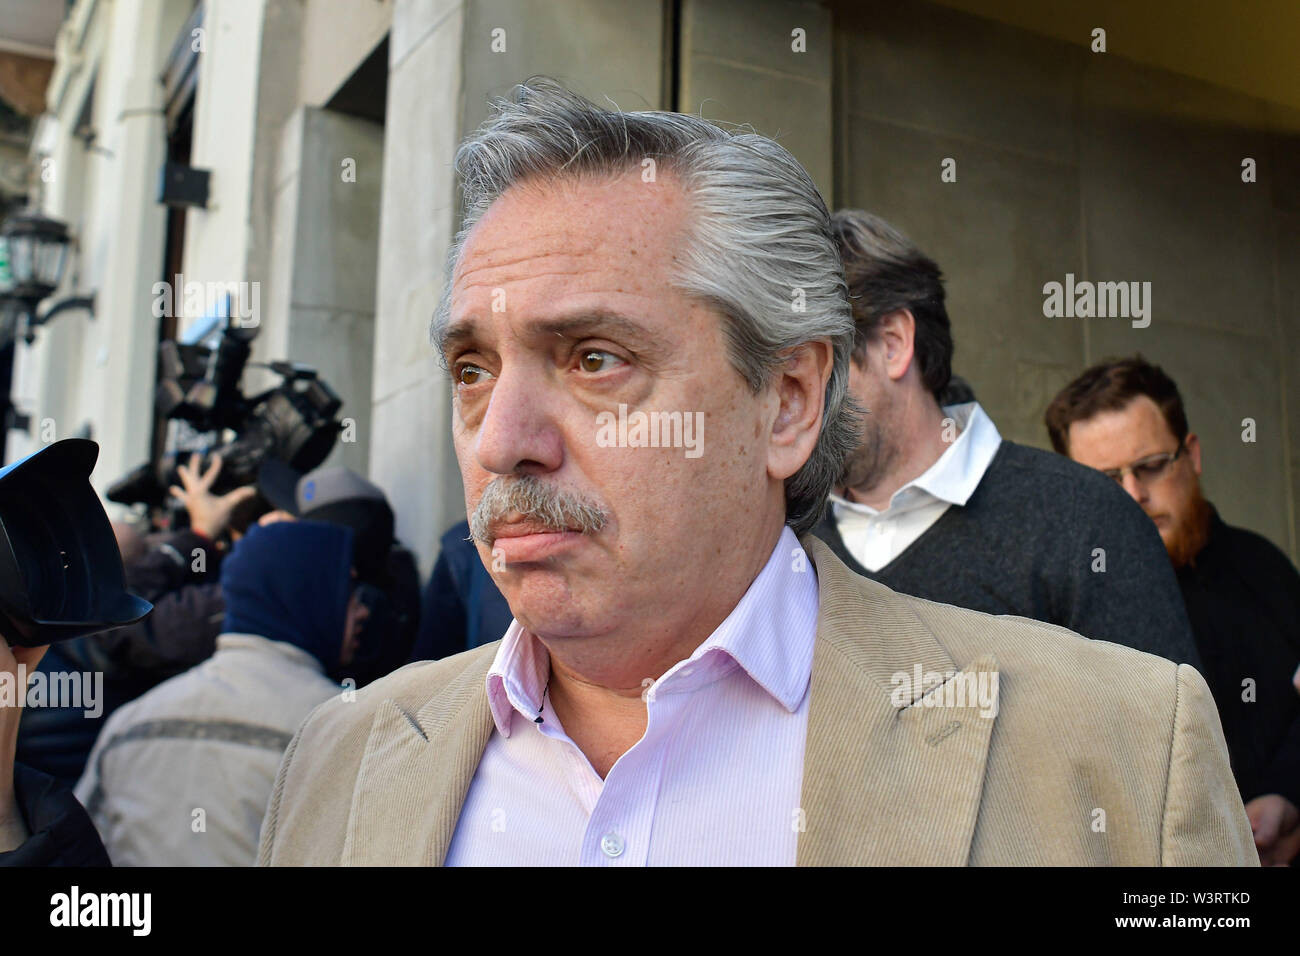 Buenos Aires, Buenos Aires, Argentina. 17th July, 2019. ALBERTO FERNANDEZ, Presidential candidate with the front TODOS, arrives at a campaign meeting ahead of the upcoming general elections. Credit: Patricio Murphy/ZUMA Wire/Alamy Live News Stock Photo